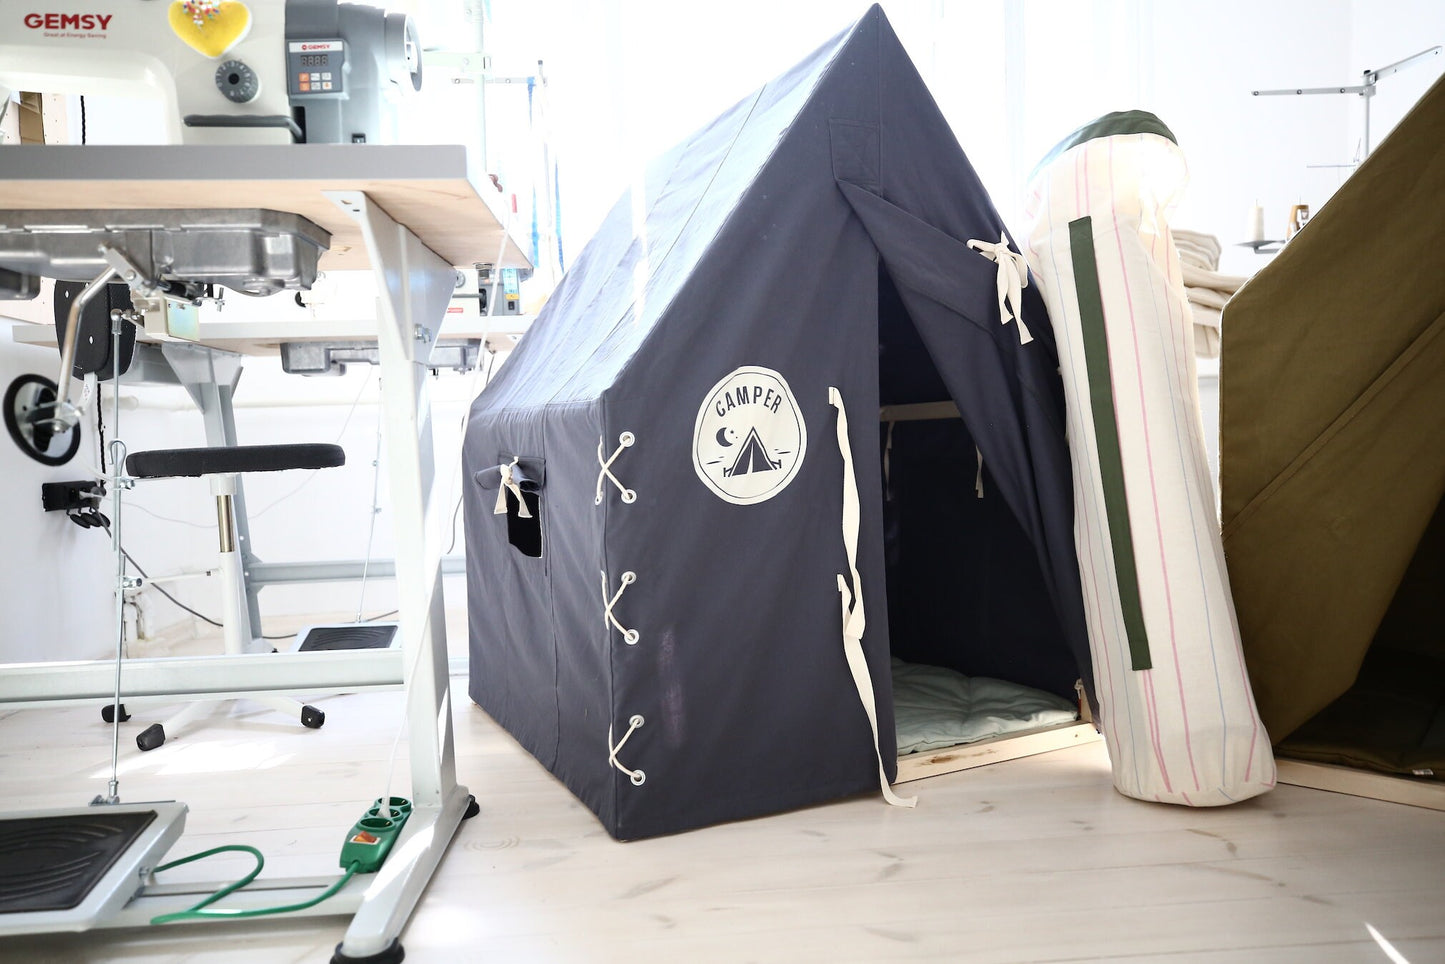 Kids Castle Playhouse, Deck Tent, Childrens Camping Tent, Teepee Style Tent, Mini Teepee, Kids Castle Play Tent - Christmas gift